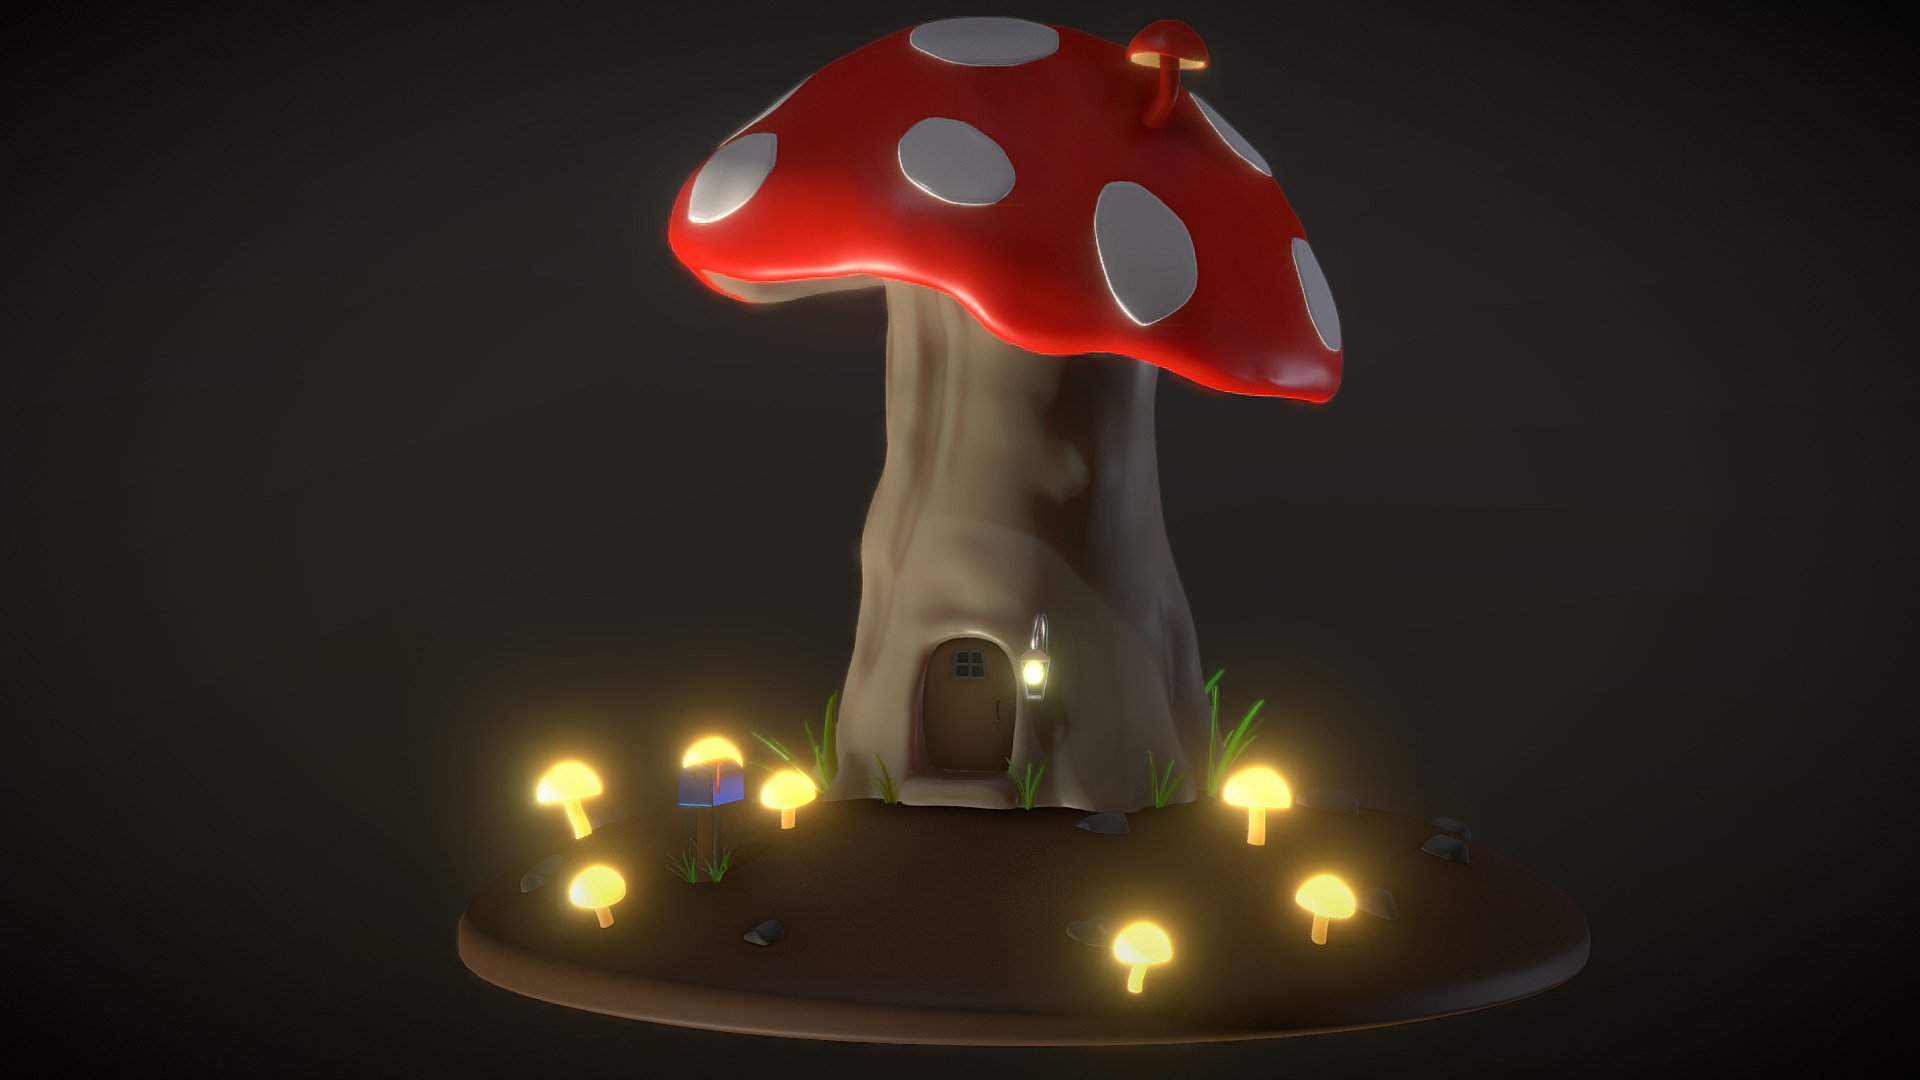 A mushroom house I created. Made with Blender 3d model